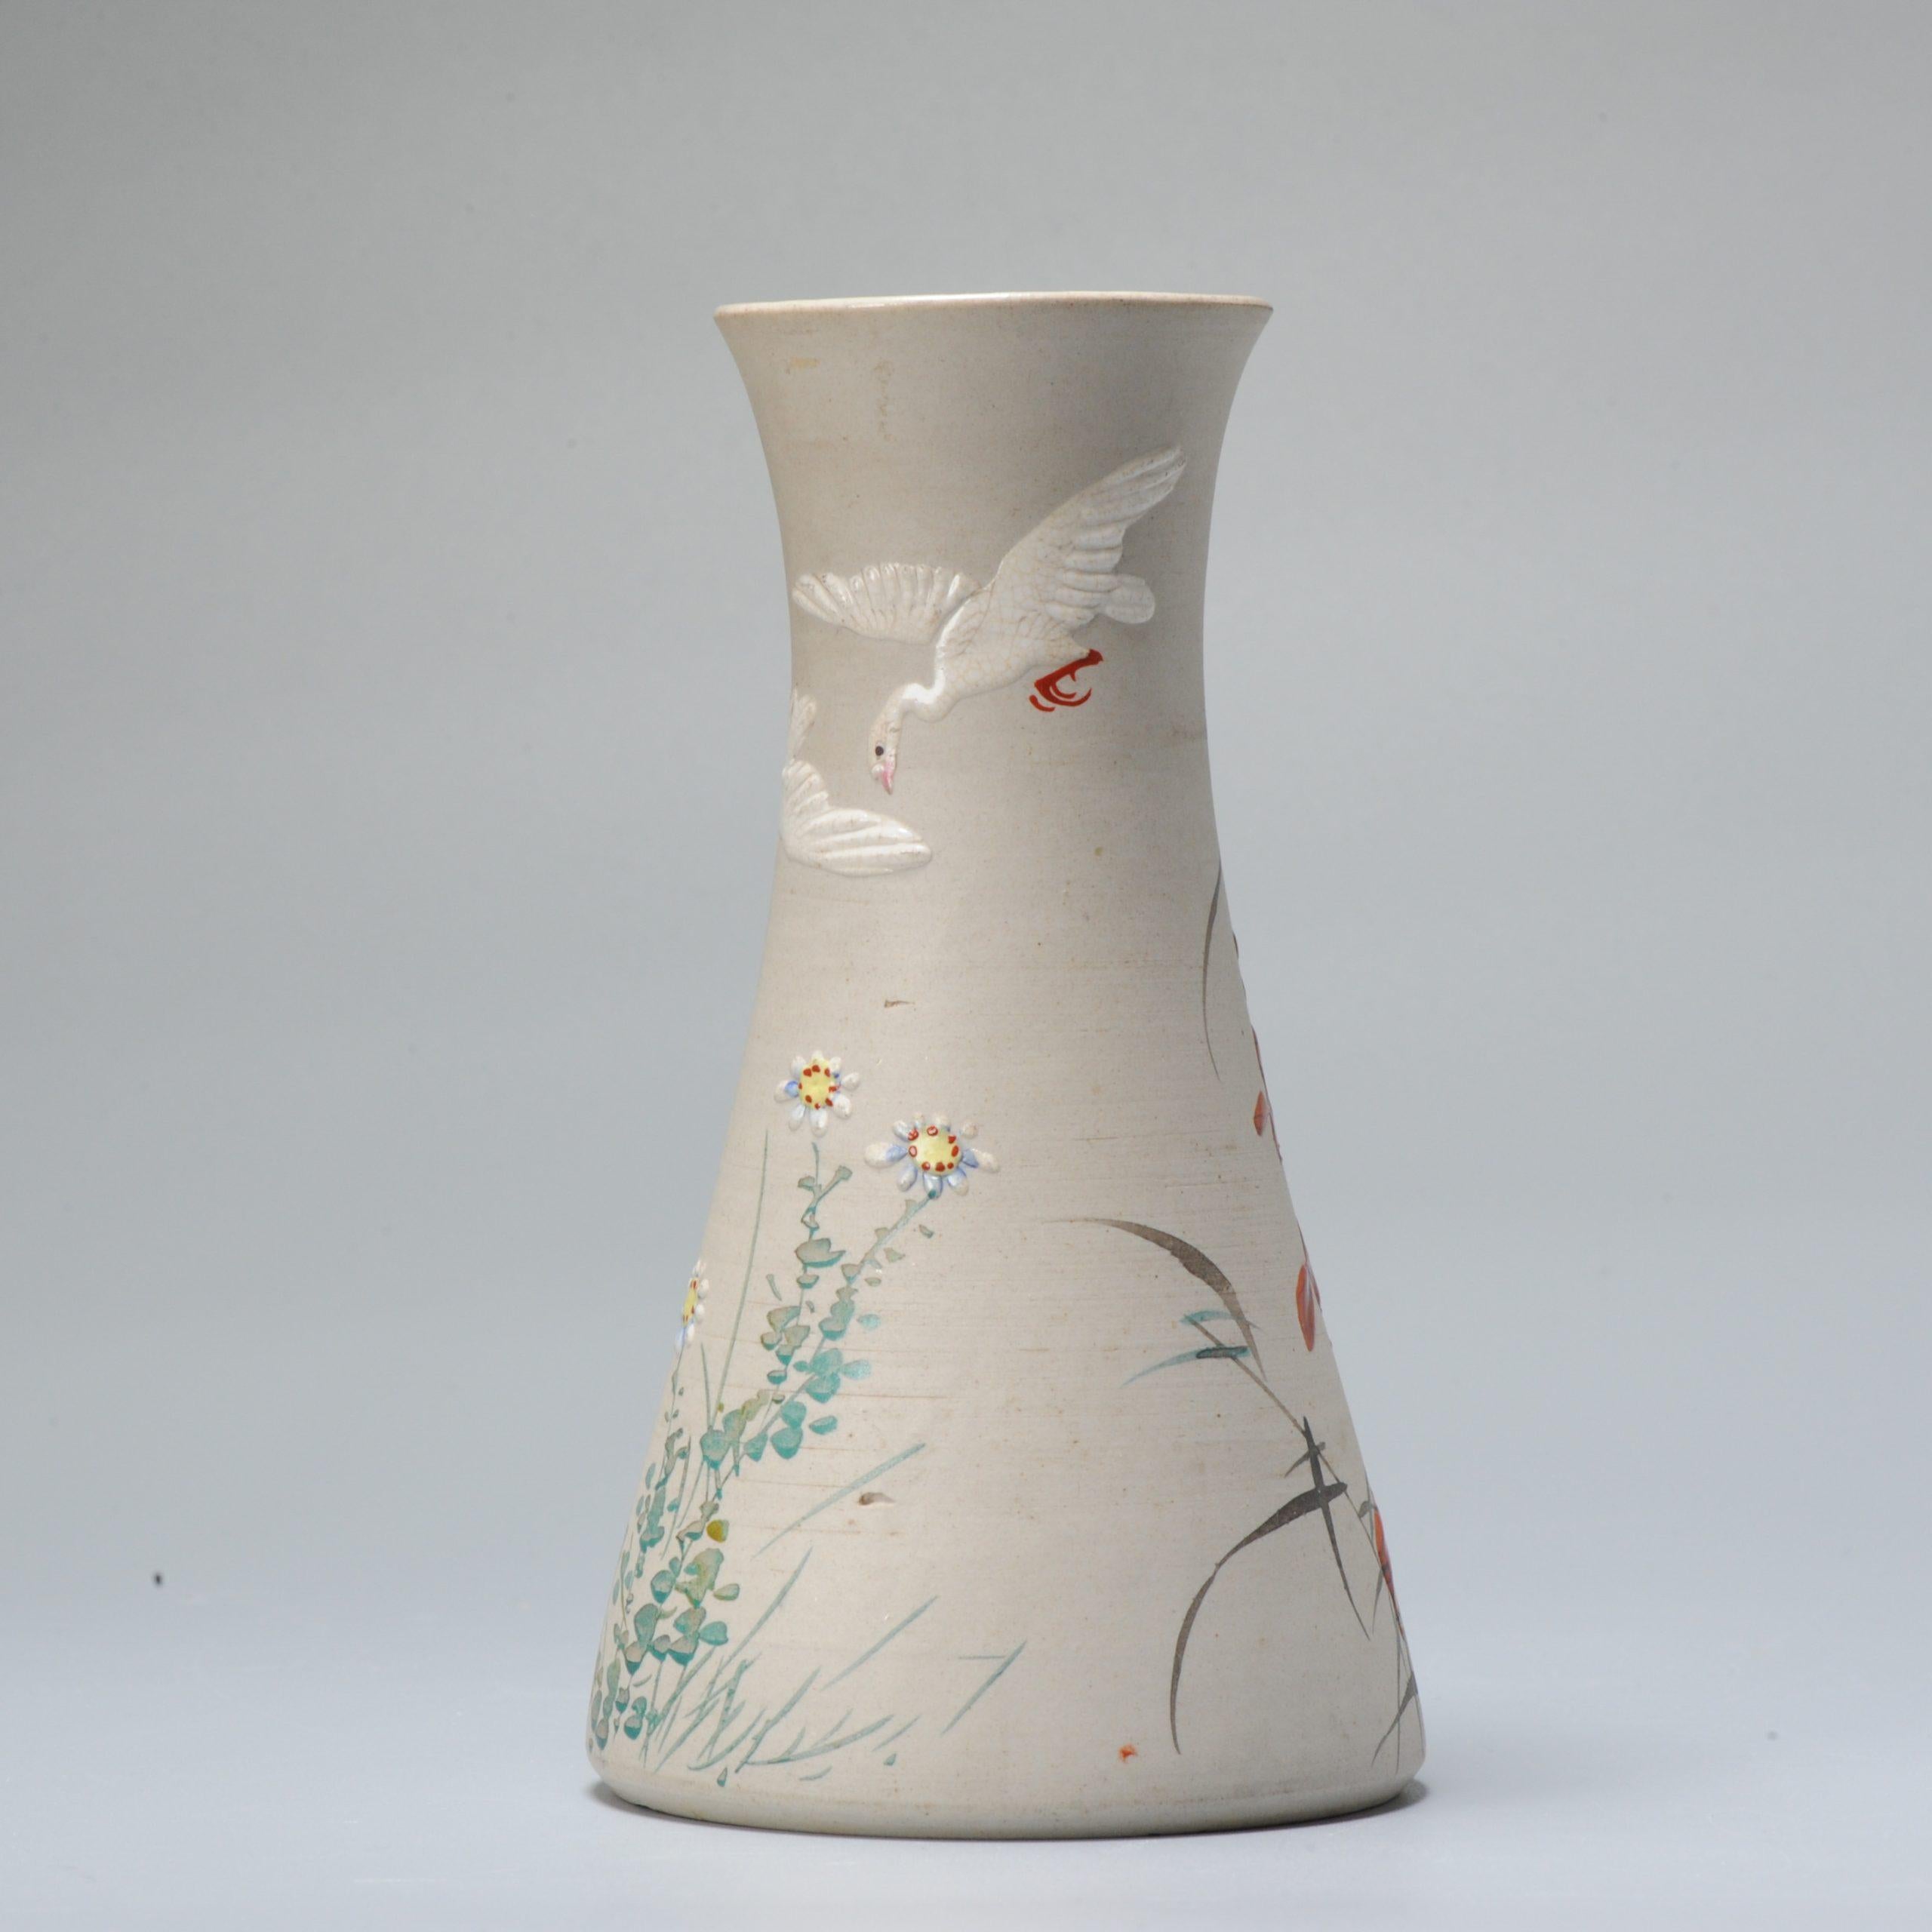 Rare and detailed piece. Banko pottery. This colorful ware was made for export to the West.

Additional information:
Material: Porcelain & Pottery
Type: Vase
Japanese Style: Sumida Pottery
Region of Origin: Japan
Period: 20th century Meiji Periode